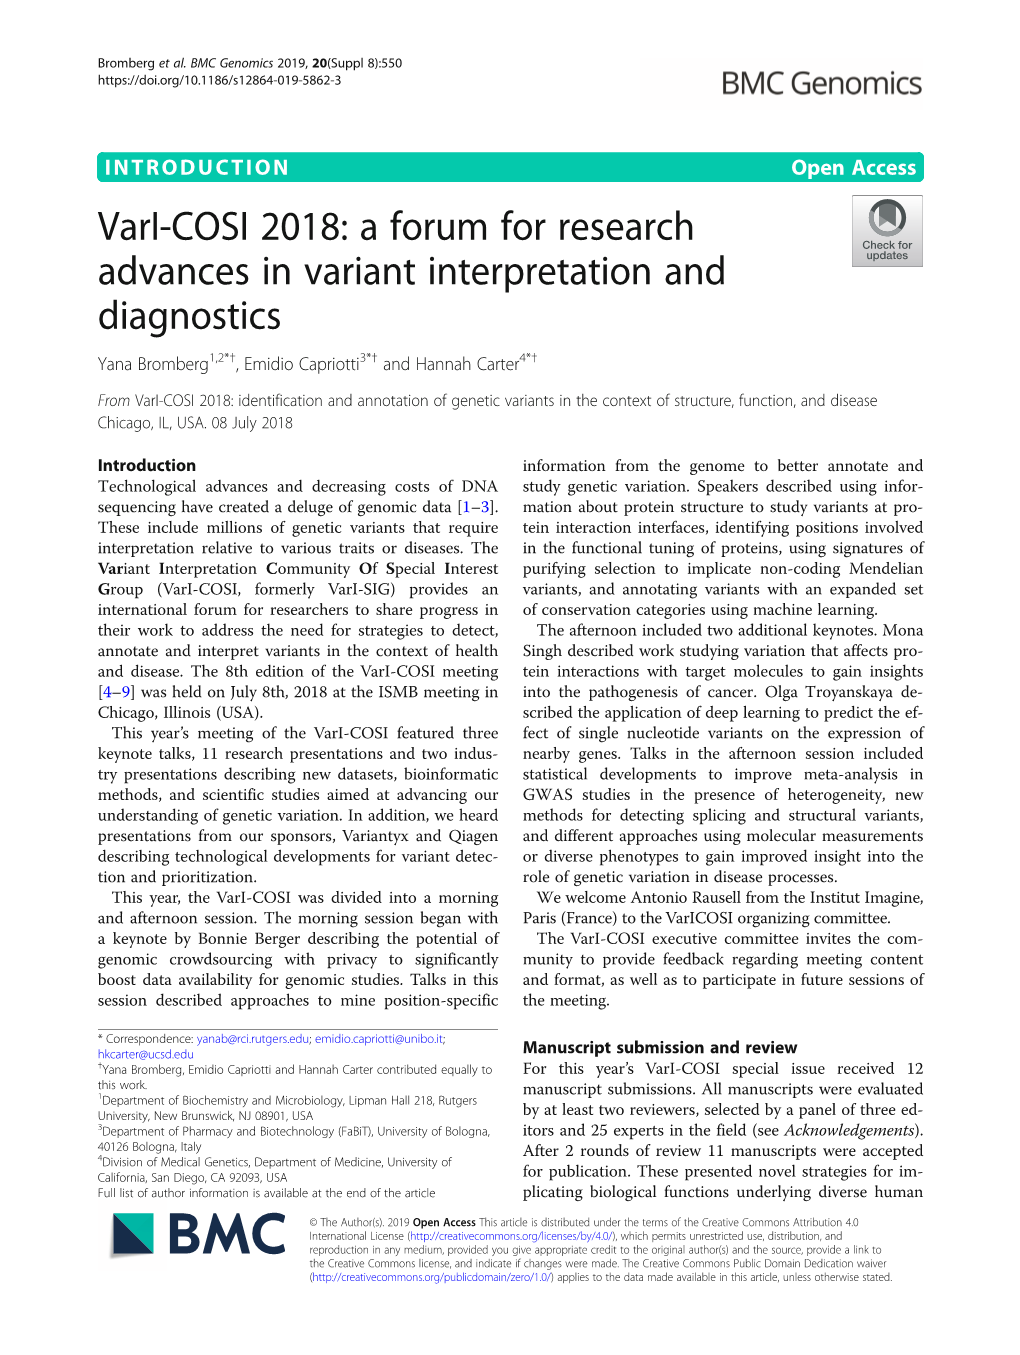 View Hkcarter@Ucsd.Edu †Yana Bromberg, Emidio Capriotti and Hannah Carter Contributed Equally to for This Year’S Vari-COSI Special Issue Received 12 This Work